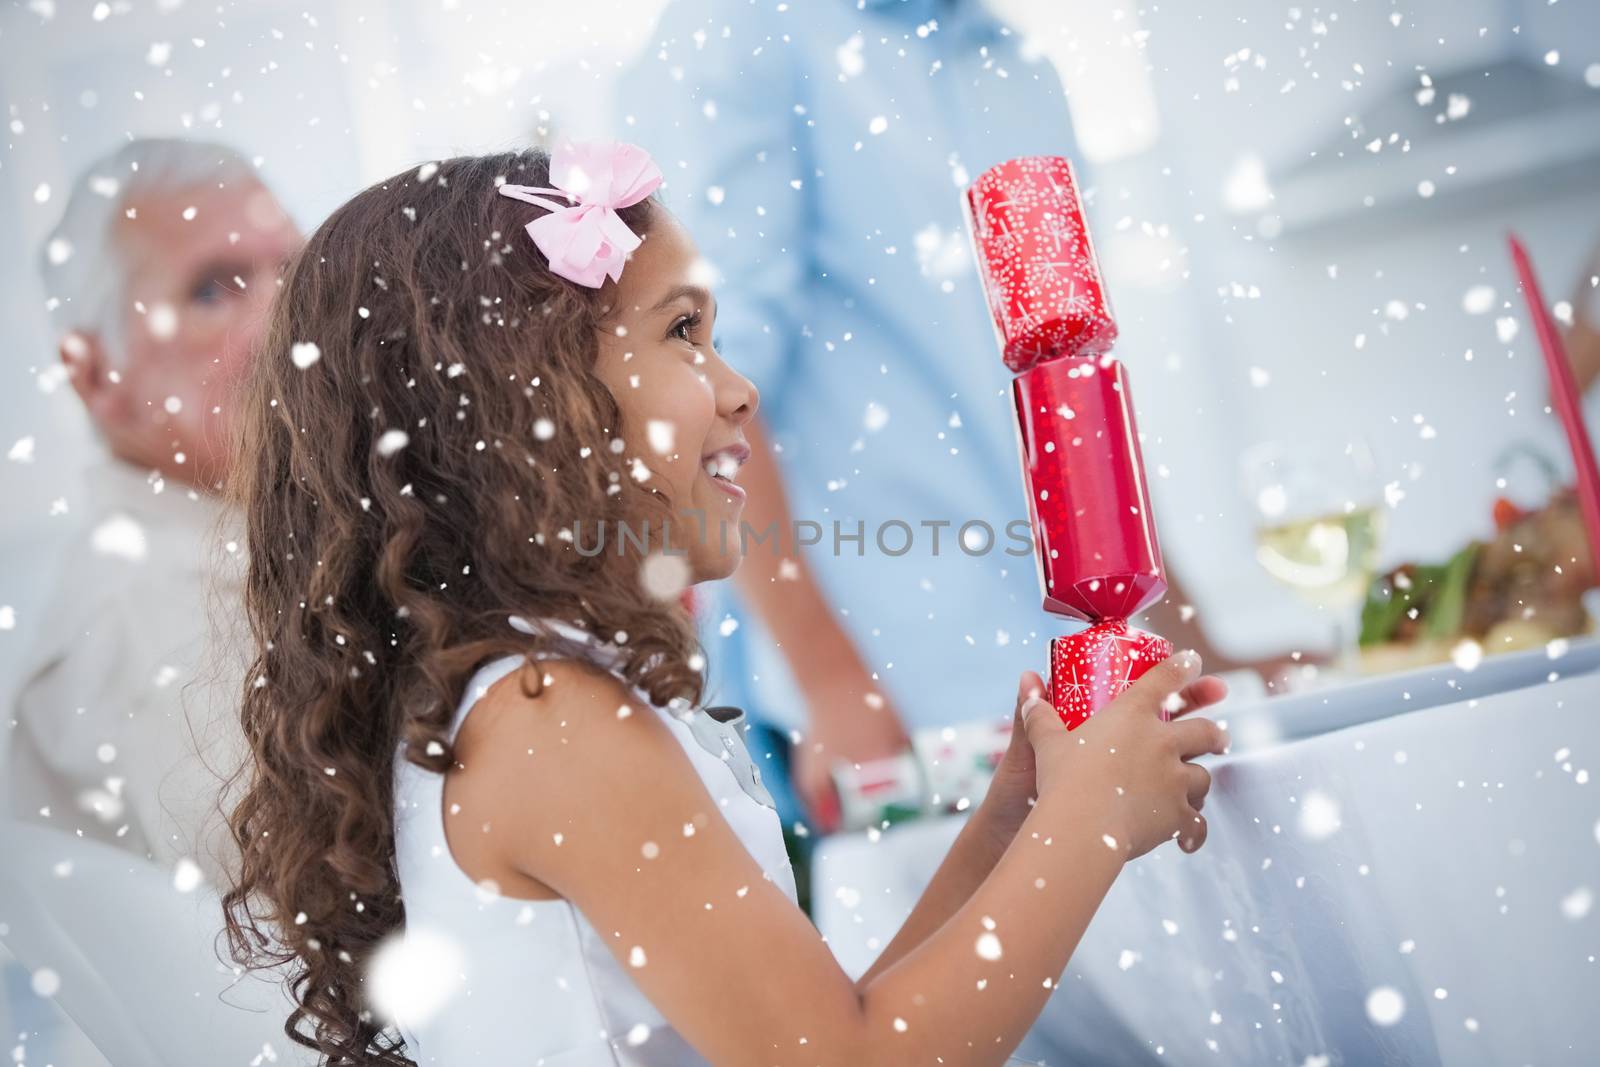 Composite image of Cute little girl holding crackers against snow falling